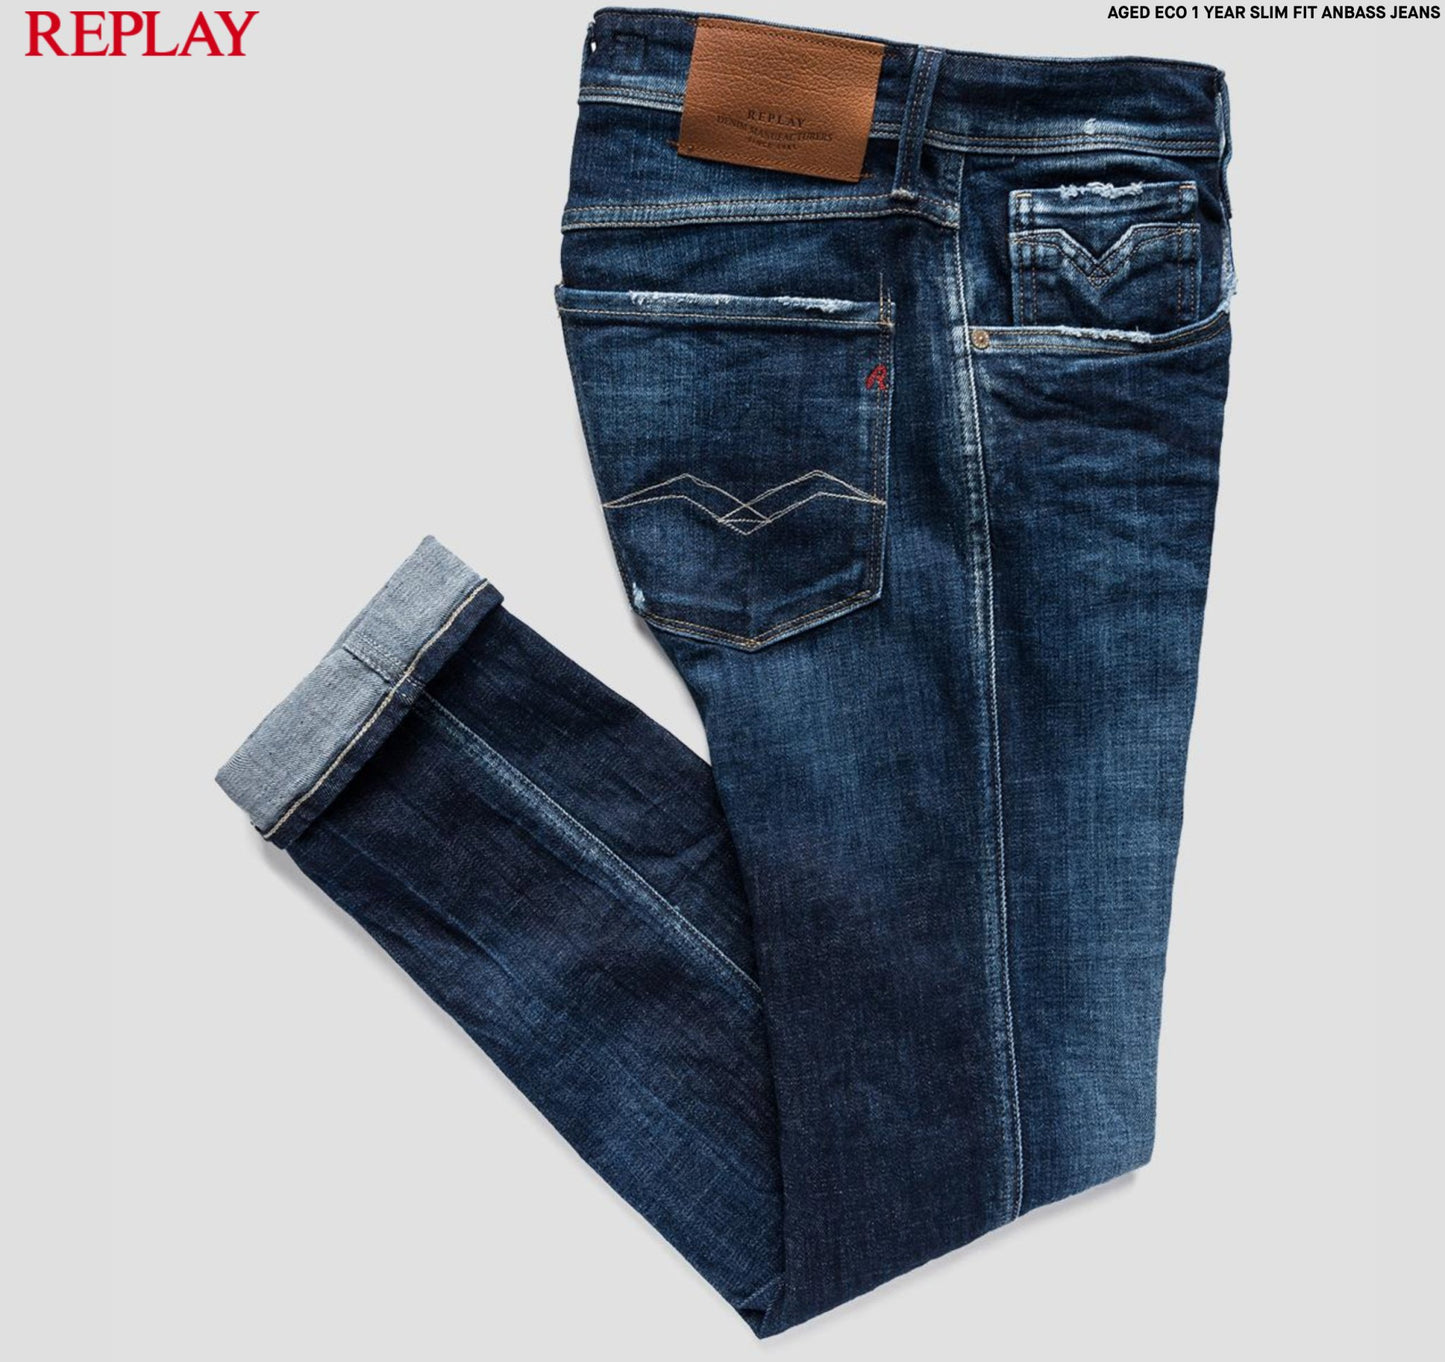 Replay Aged Eco 1 Year Slim Fit Anbass Jeans - GLS Clothing